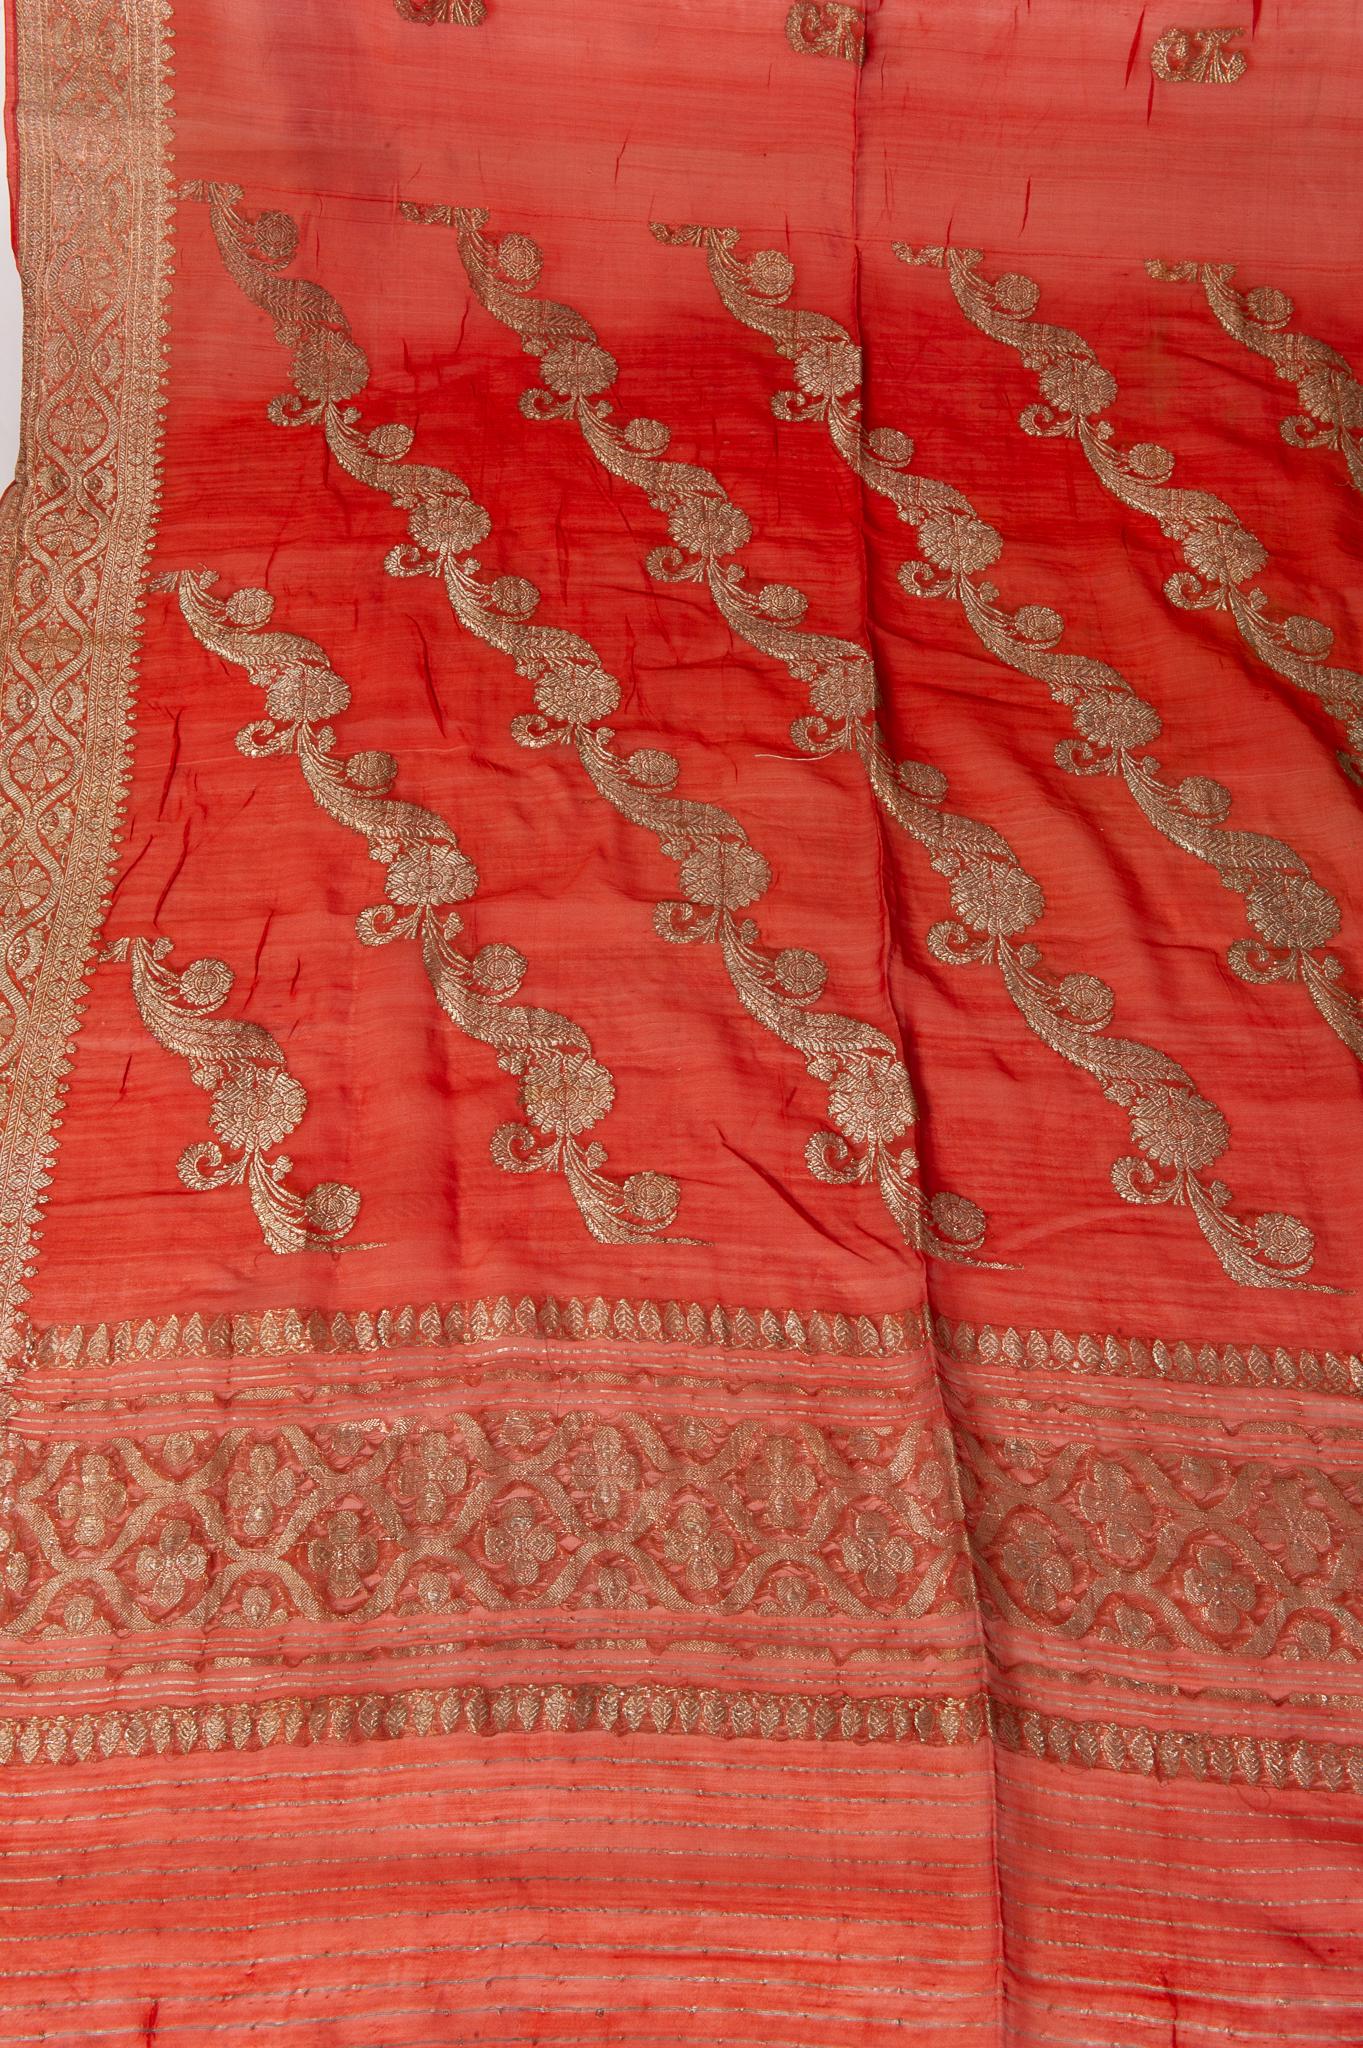  Indian Sari Coral Color New Idea for Unusual Curtains Also For Sale 8